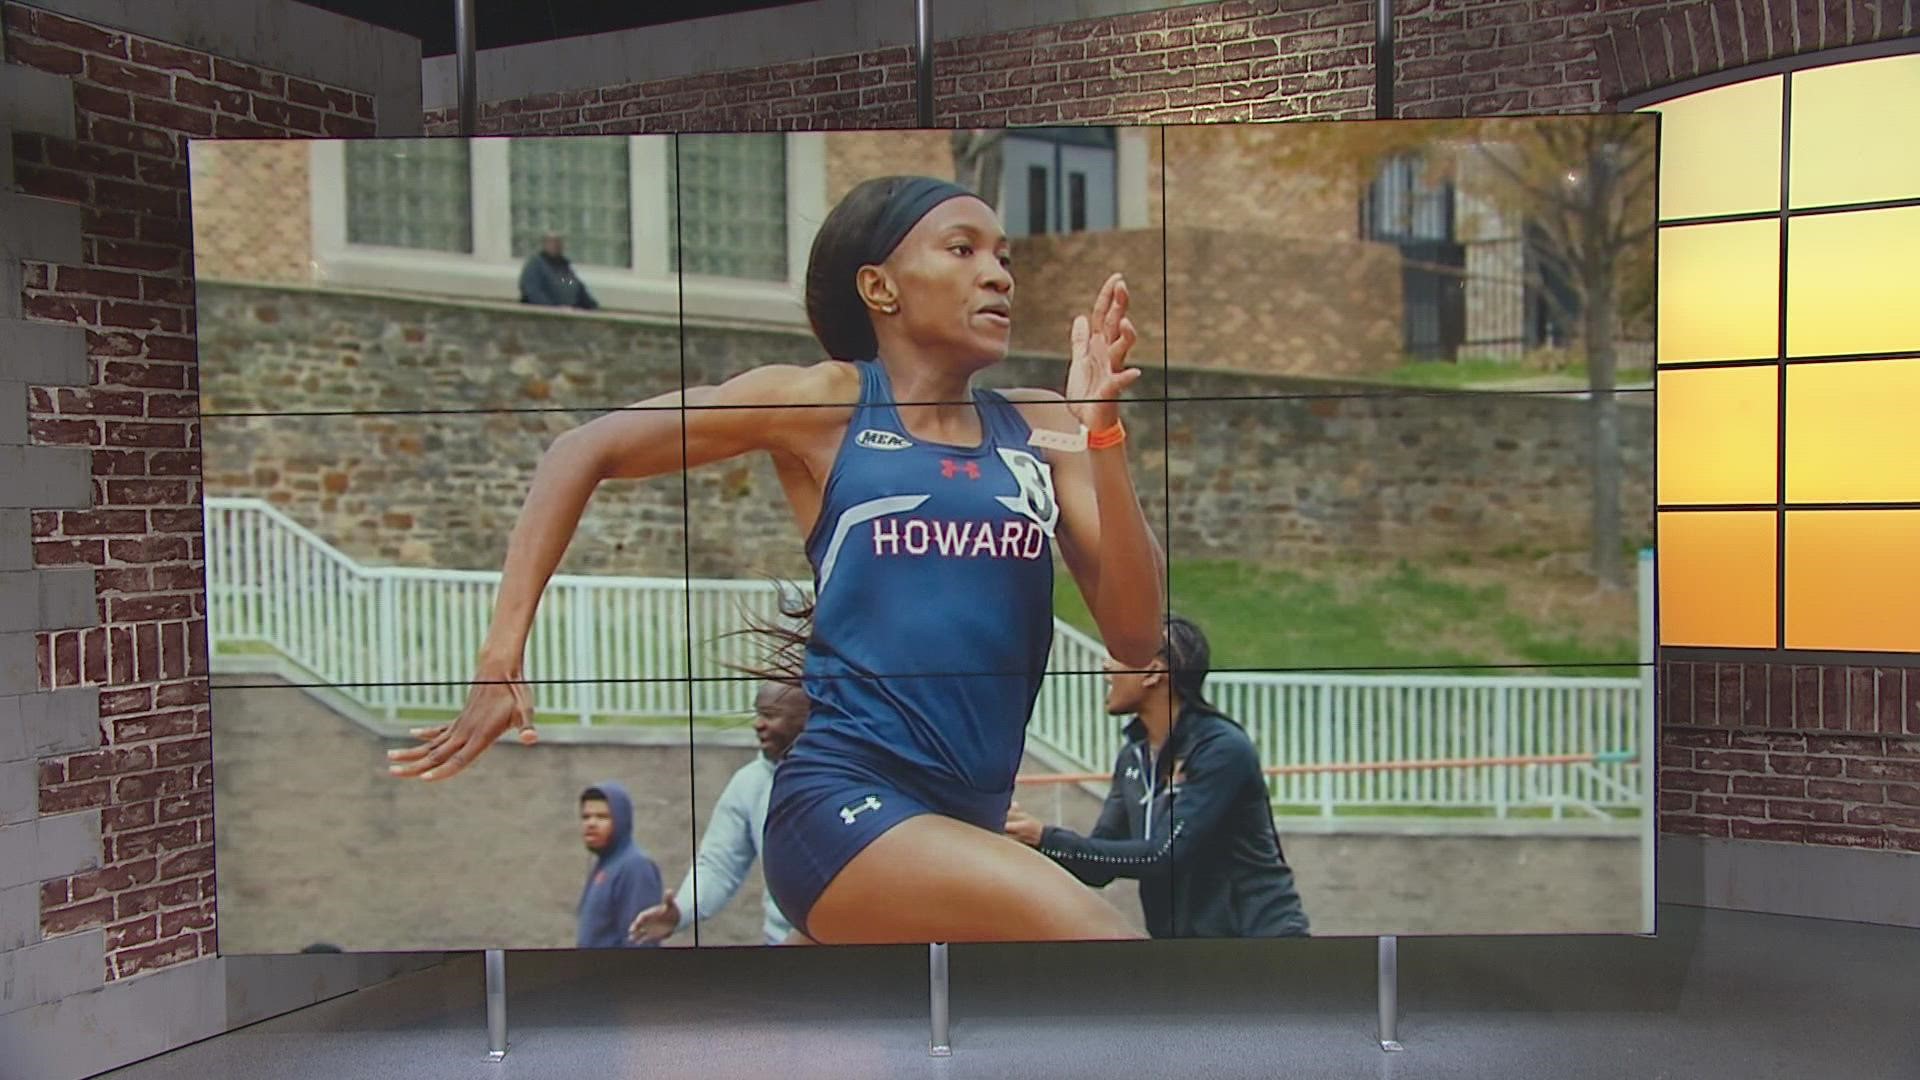 Howard is signing a school-wide deal with the brand to provide uniforms and gear for the teams' upcoming seasons.